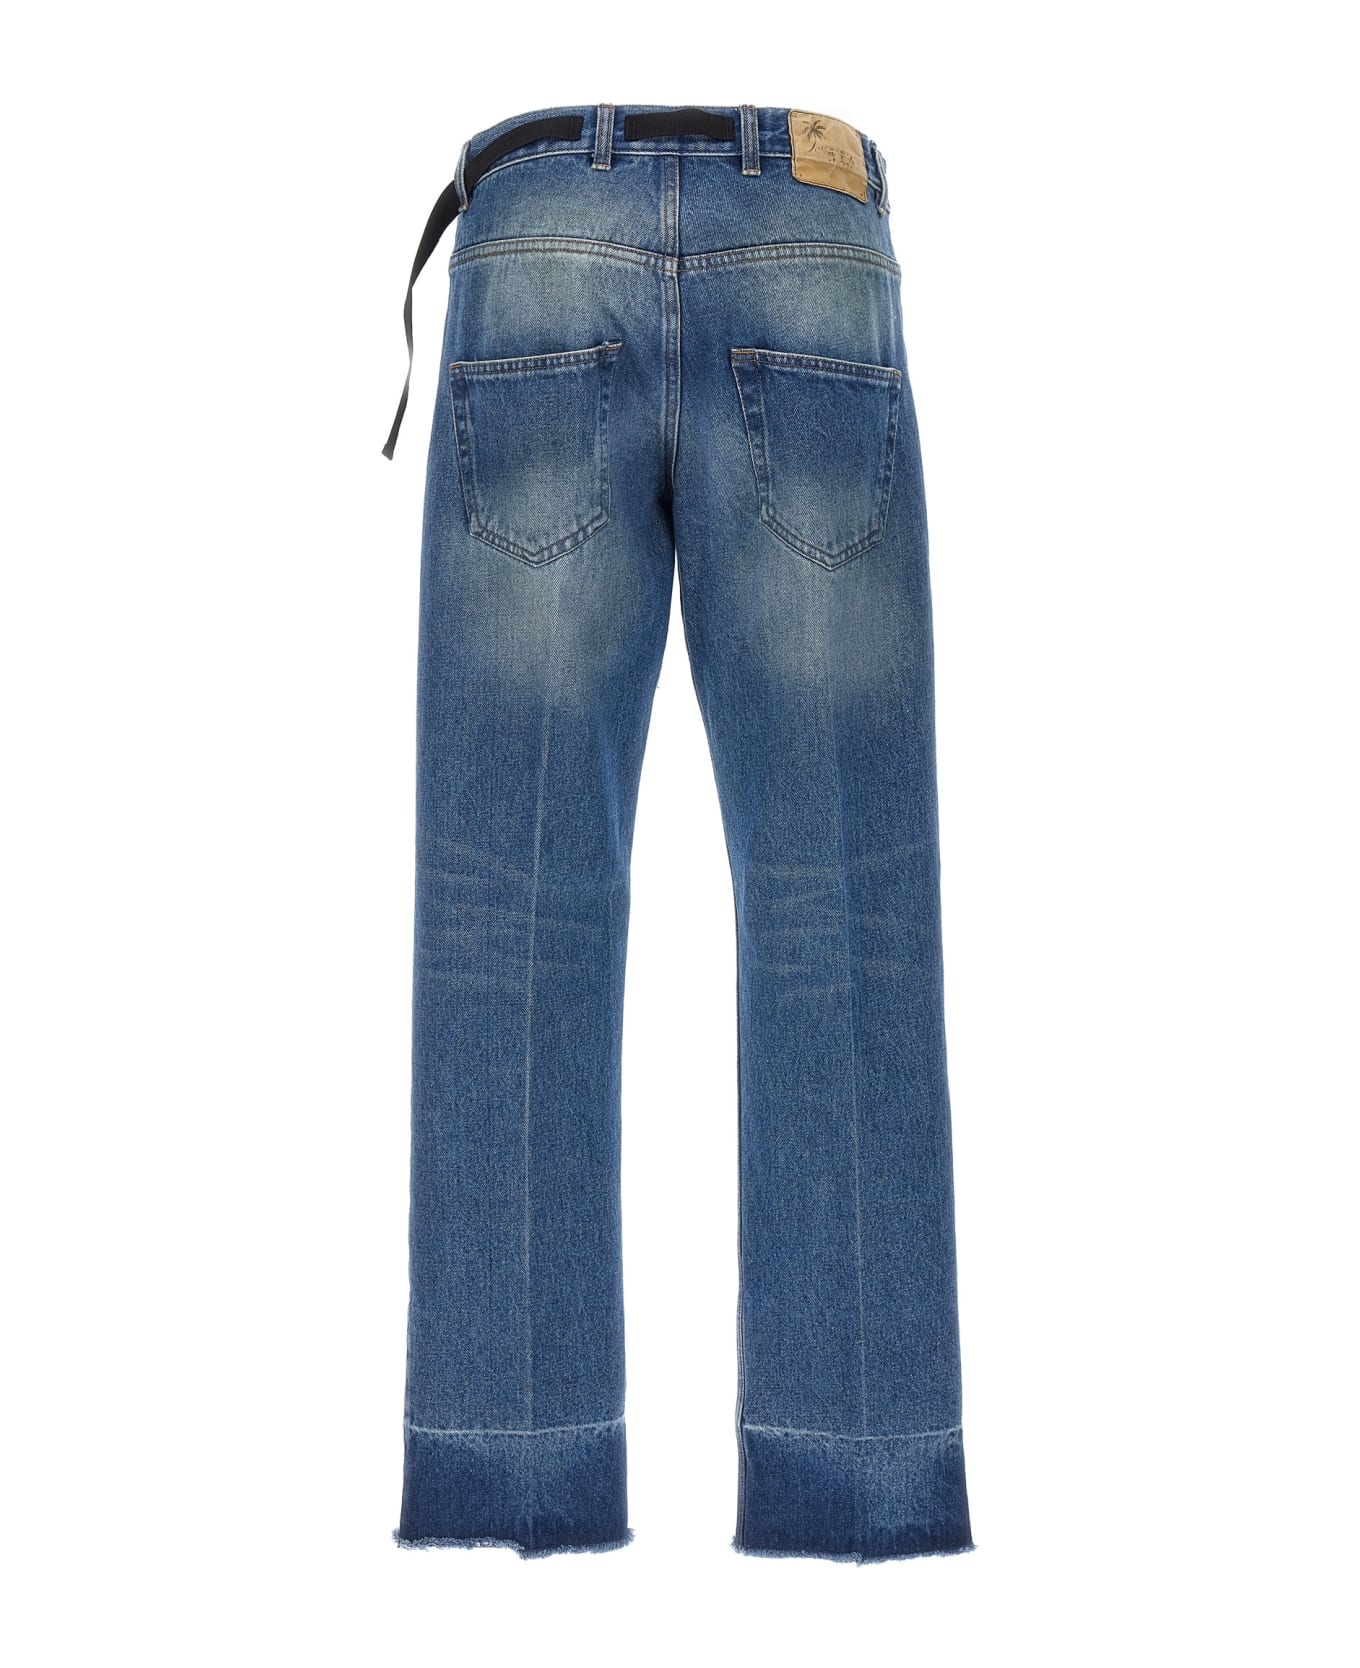 N.21 Pleated Jeans - Blue